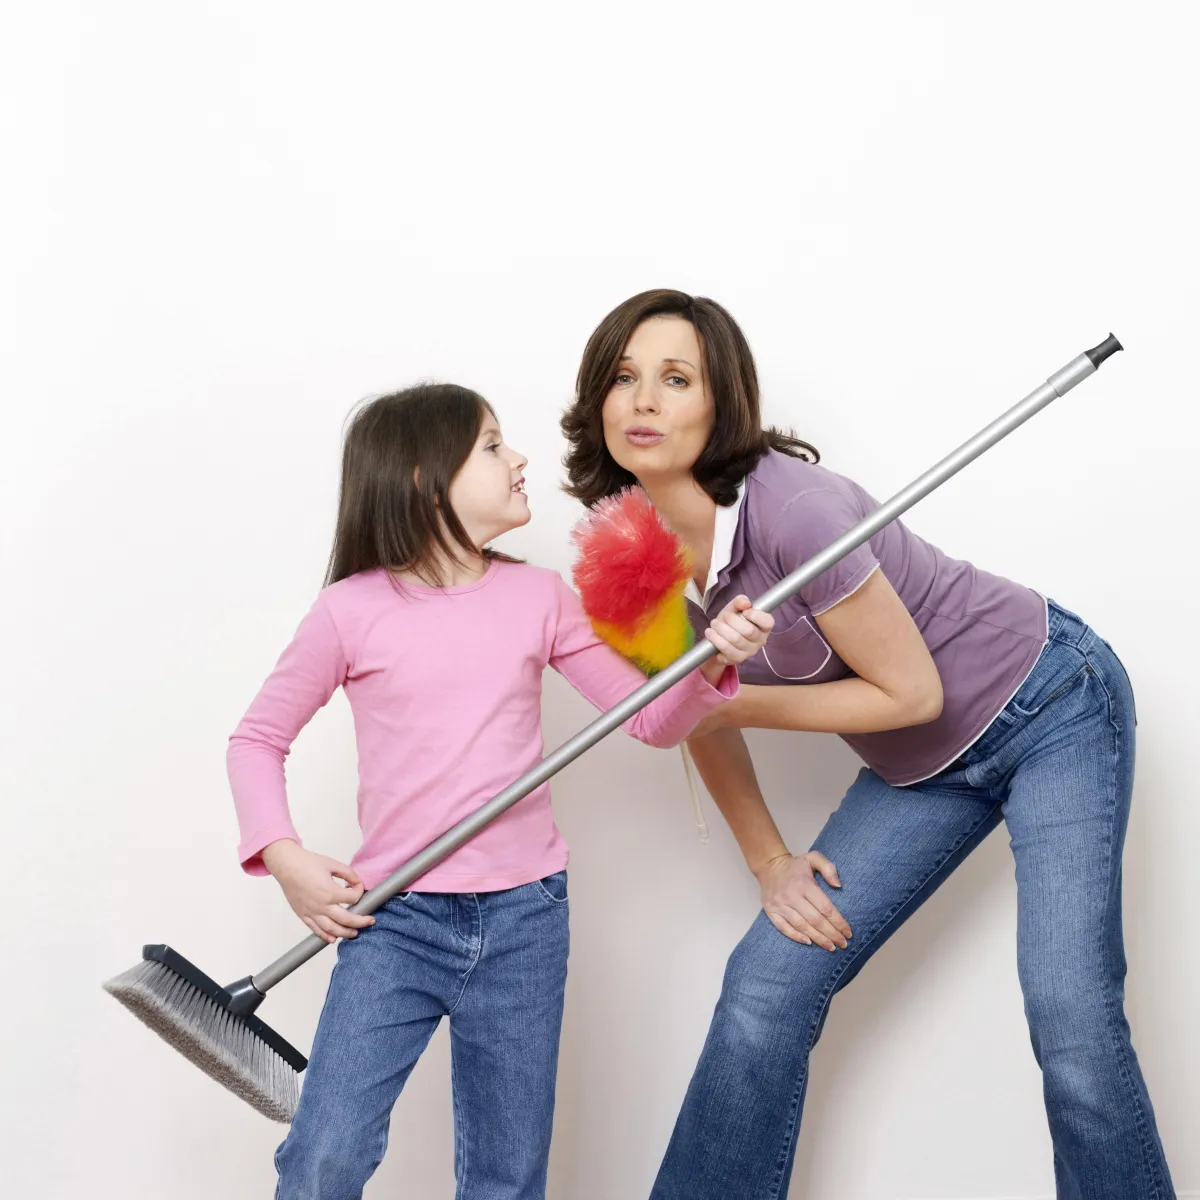 mom and daughter having fun cleaning